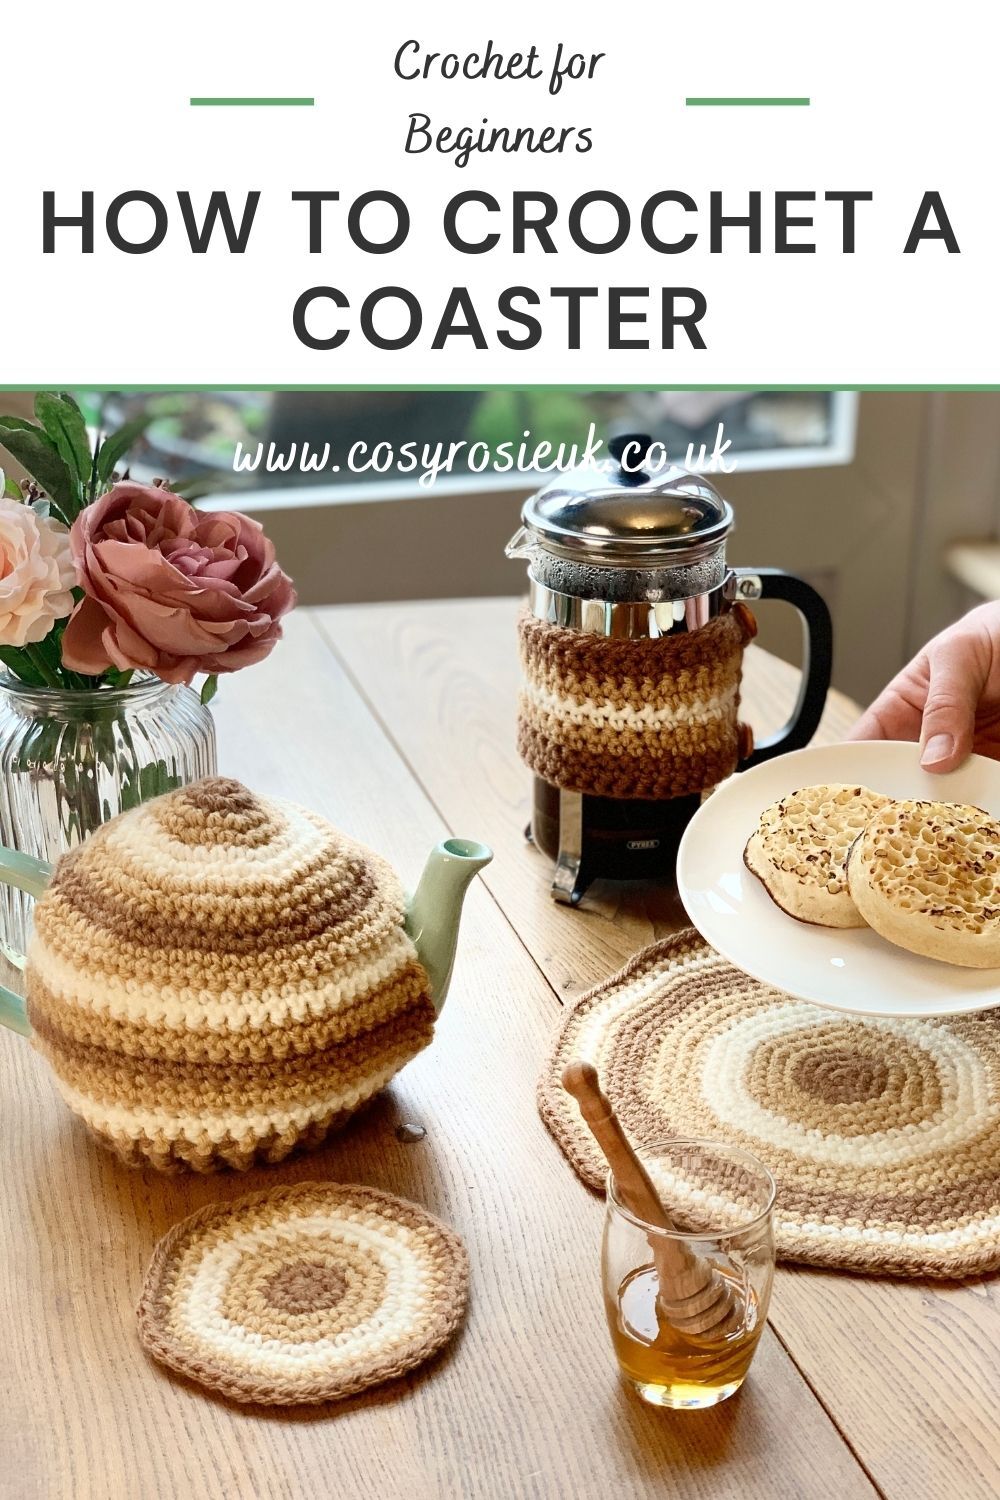 How to crochet a coaster